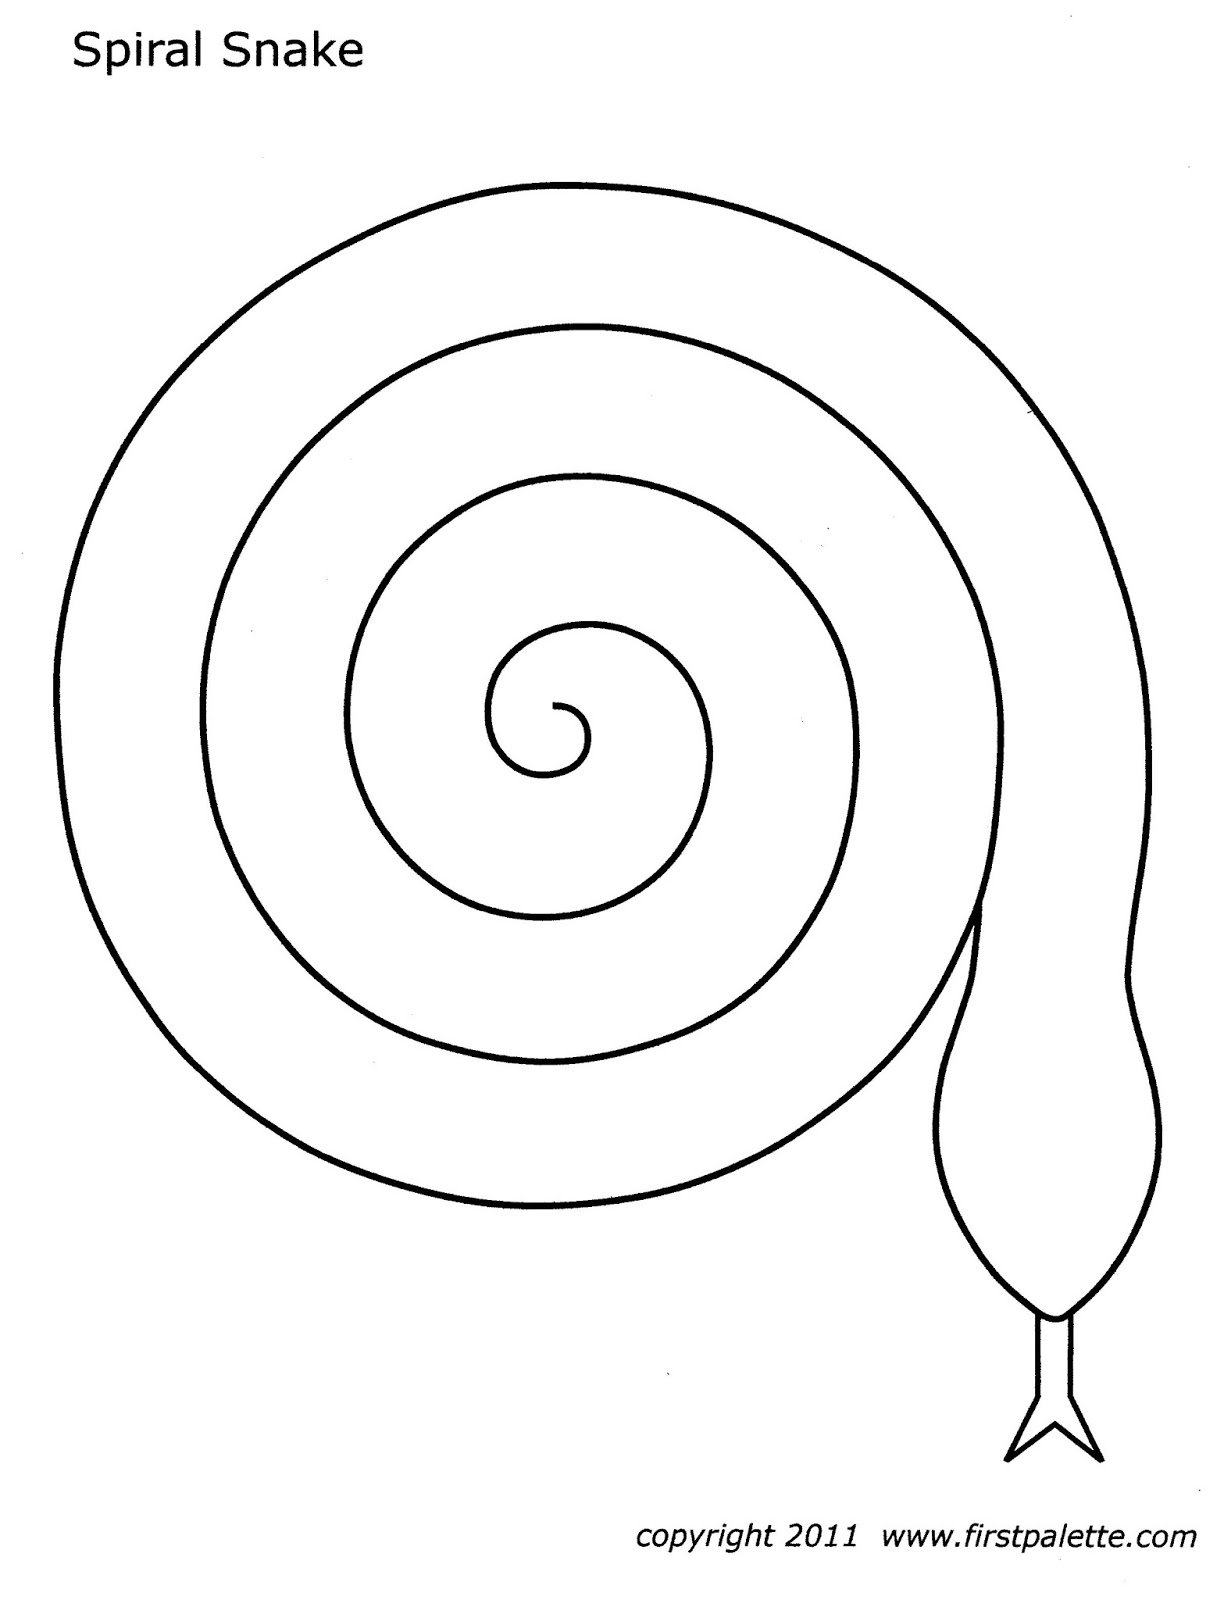 Jovial spiral coloring page